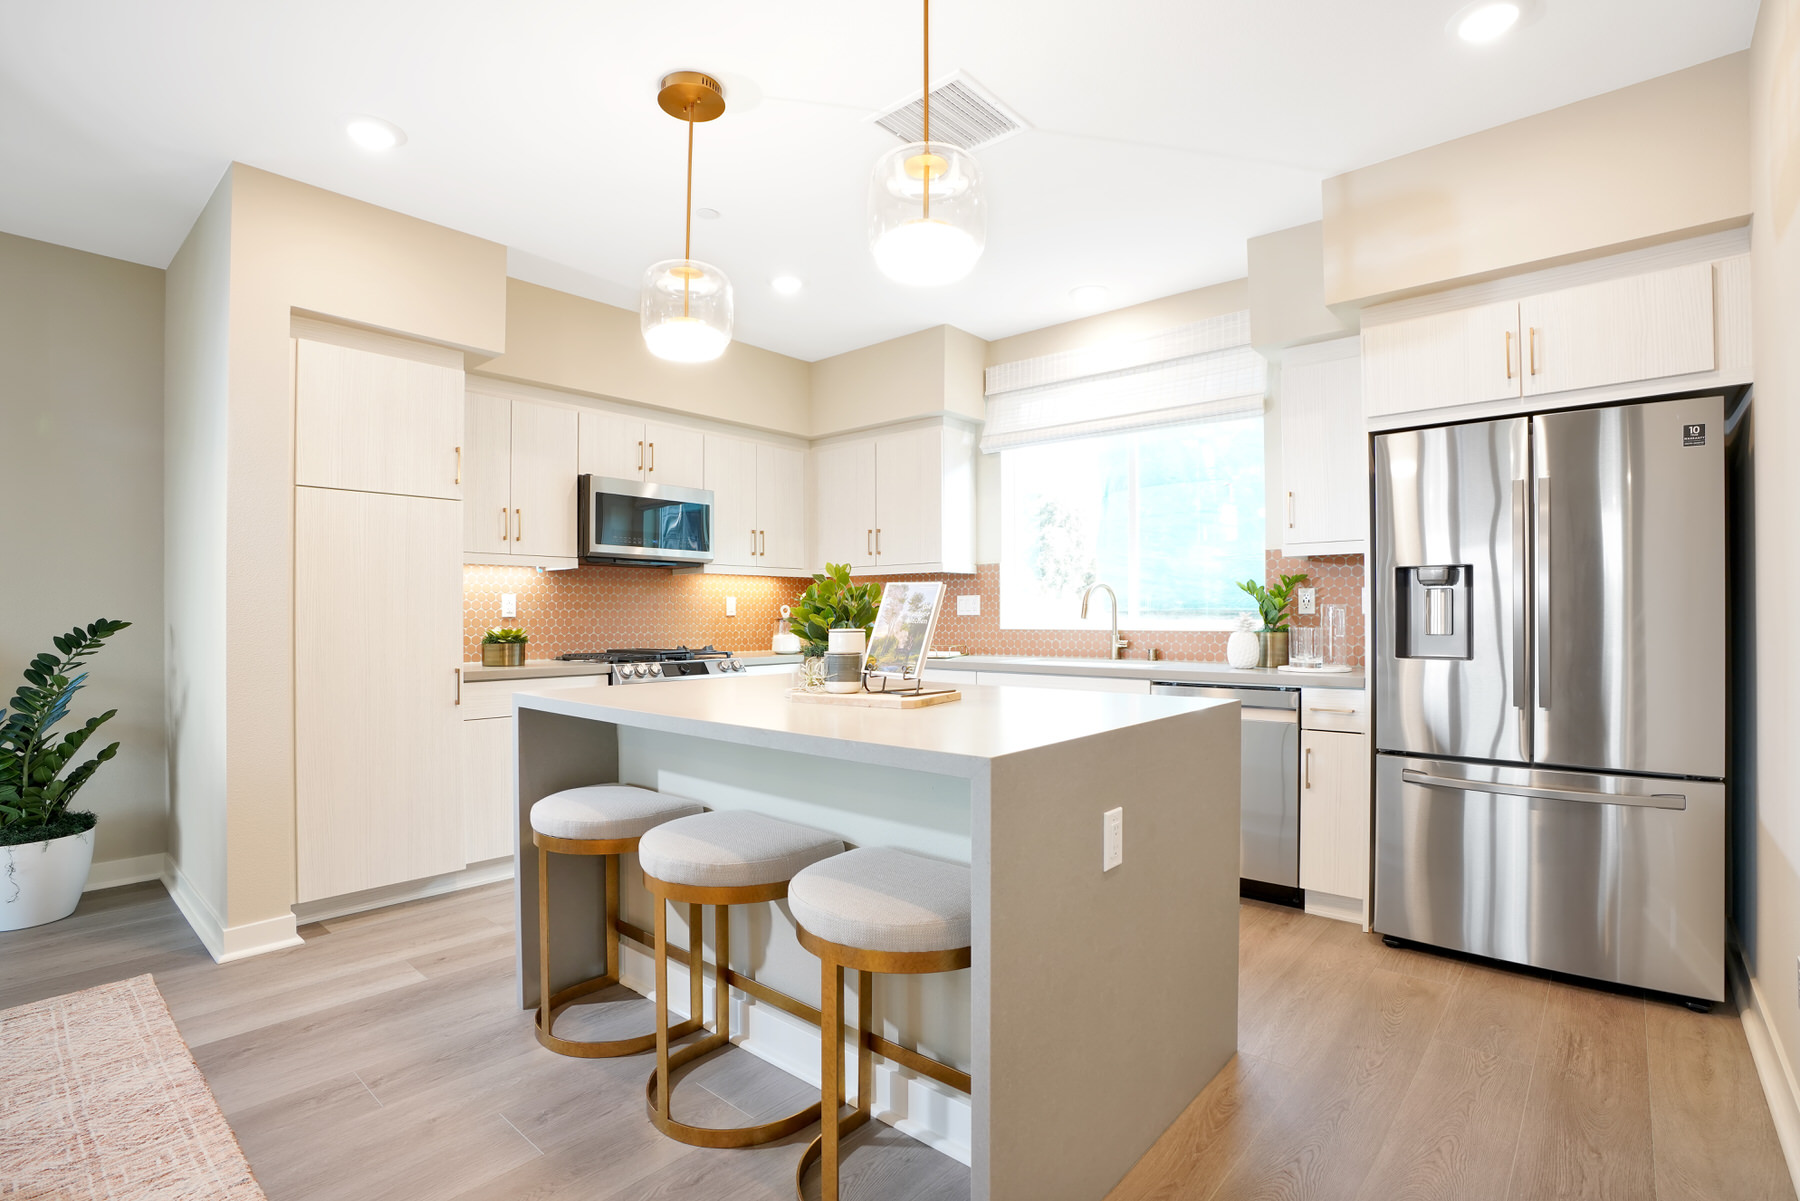 Kitchen in Plan 4A at Townes at Magnolia by Melia Homes in Anaheim, CA